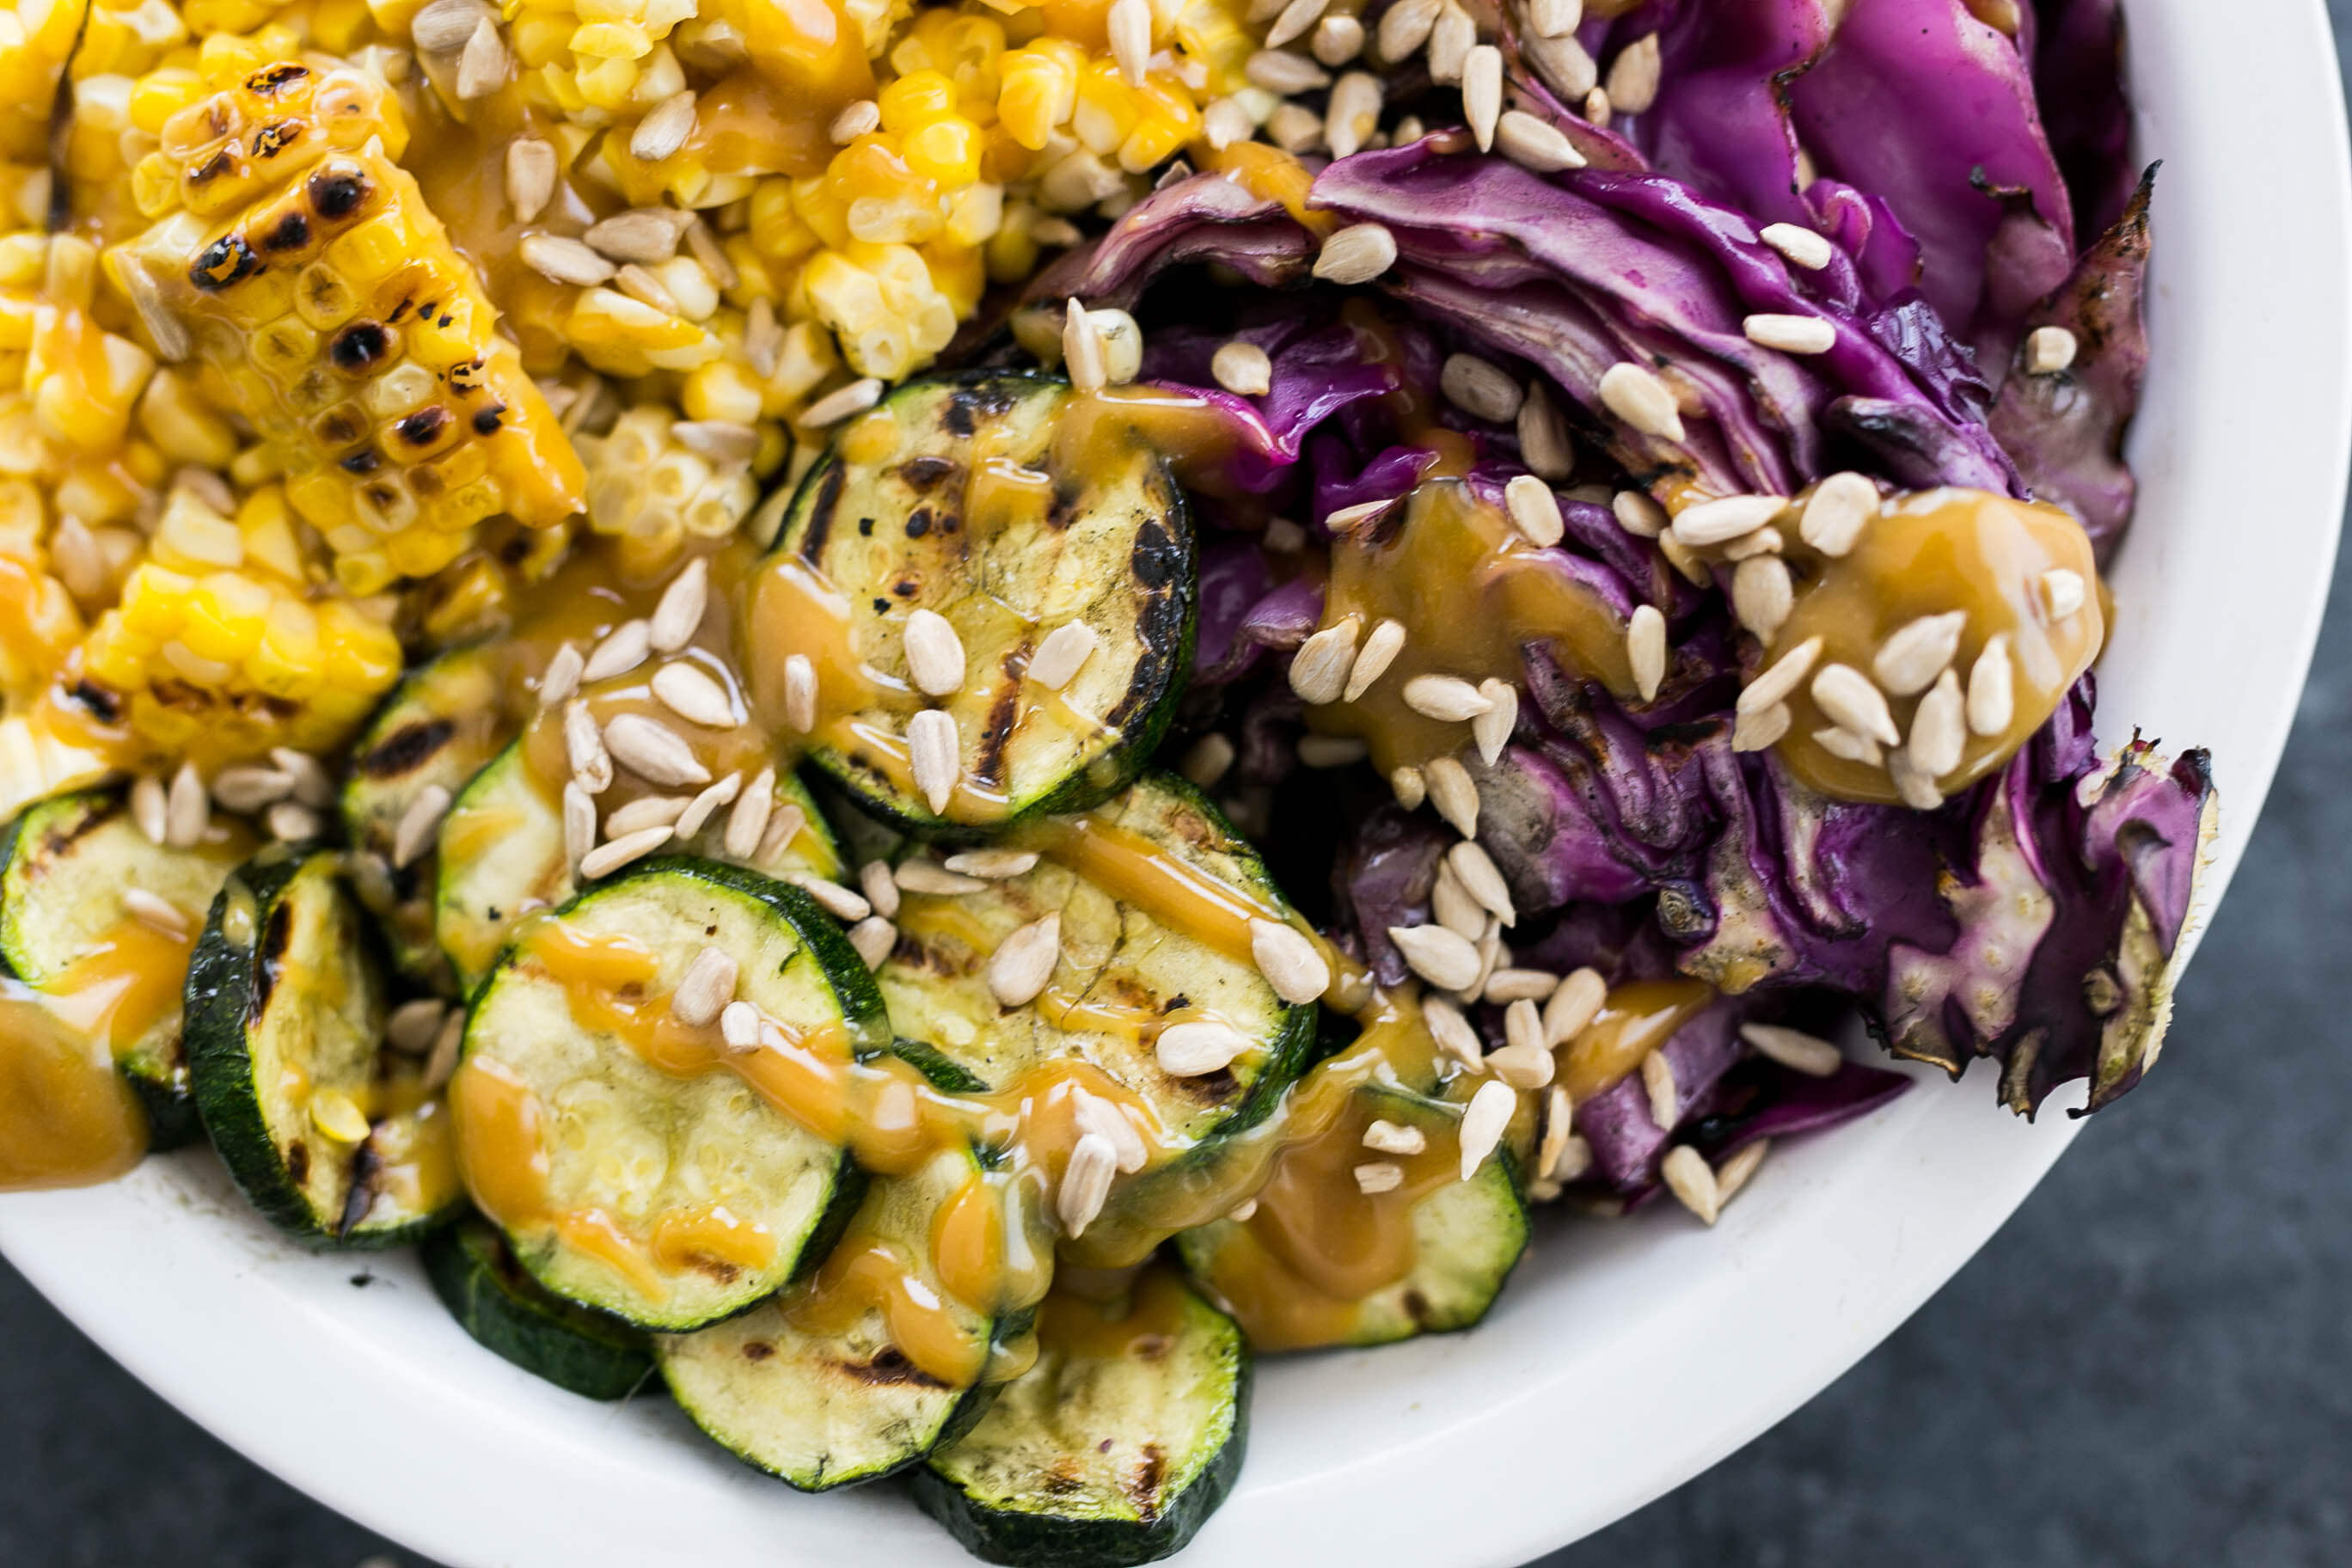 20 Summer-Inspired Meals Your Clients Will Love: BBQ Farmer’s Market Salad with Sunbutter Dressing